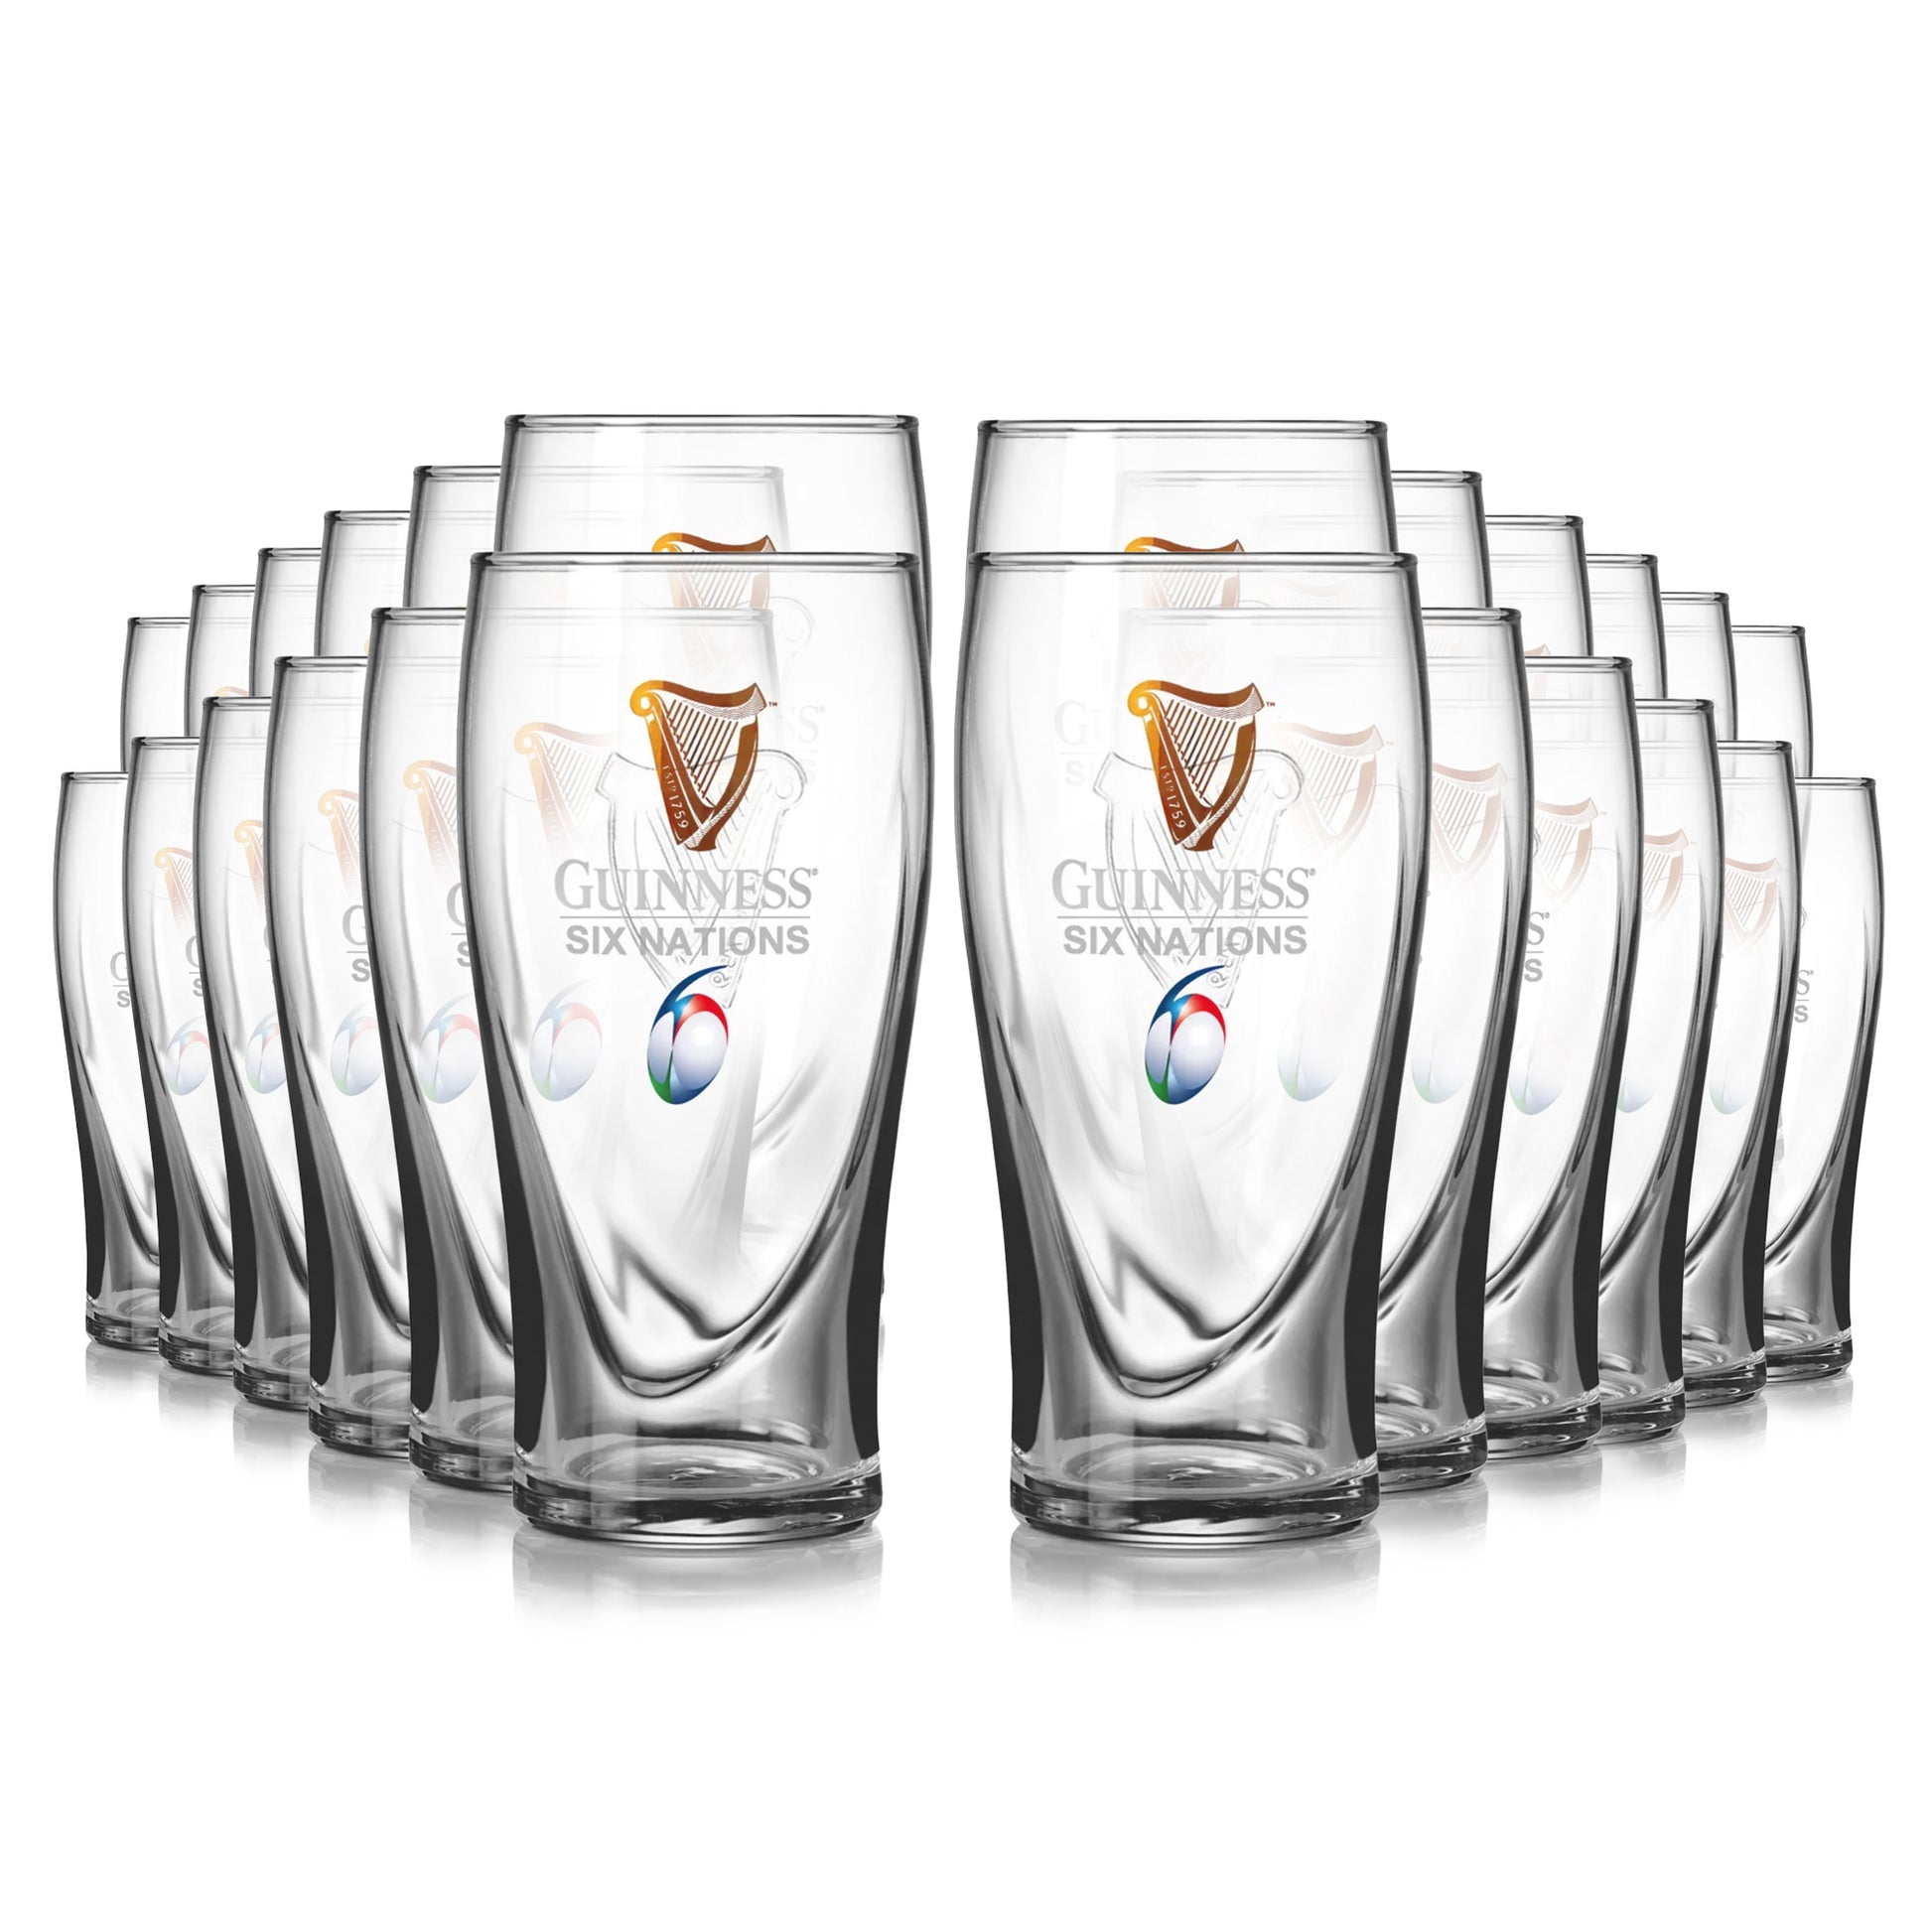 Eight Guinness Six Nations Pint Glasses - 24 Pack featuring the Six Nations logo on a white background. (Brand: Guinness UK)